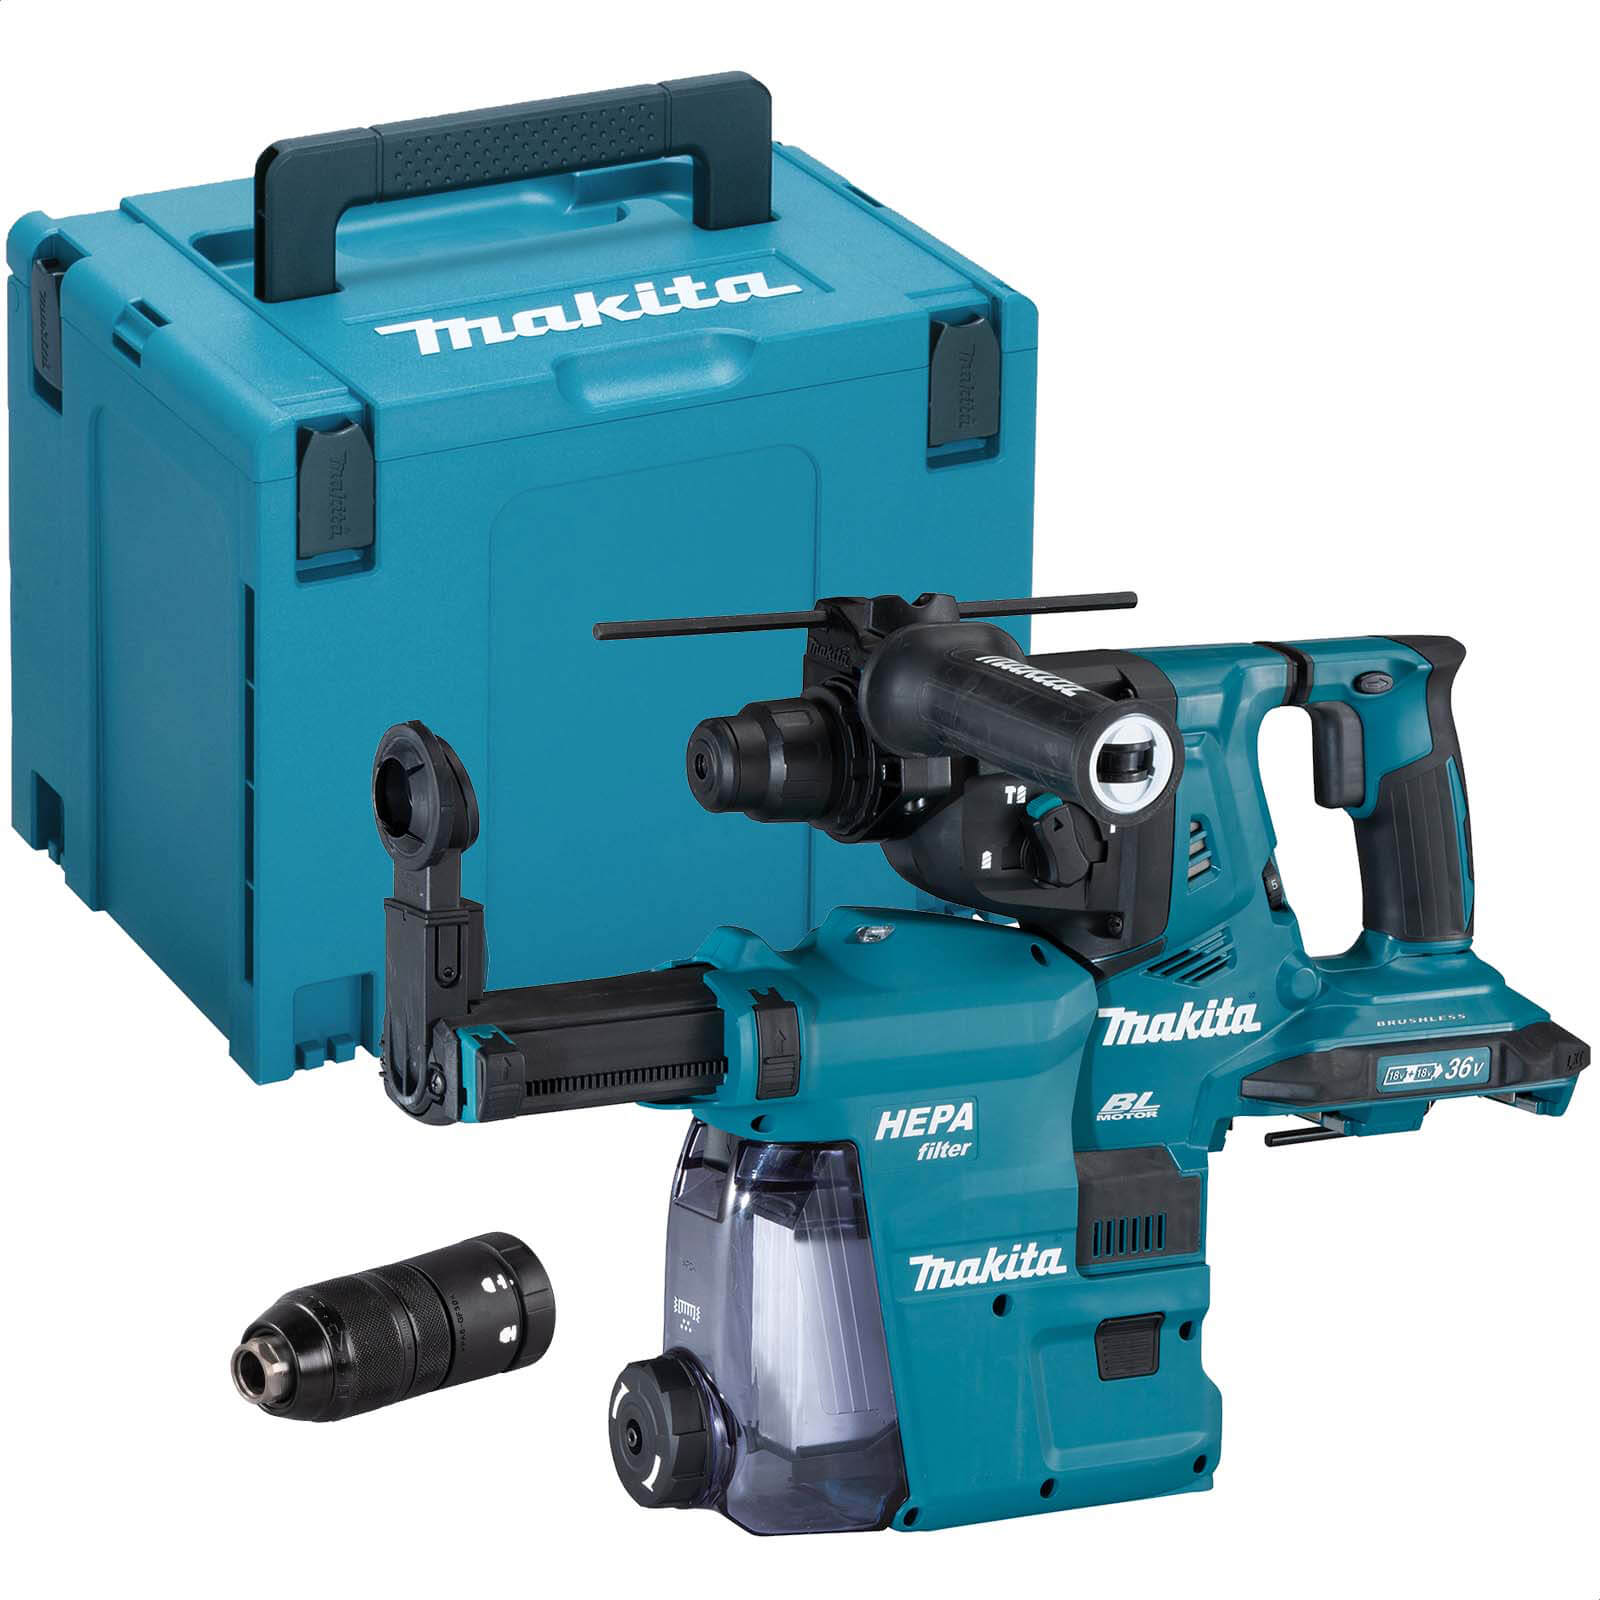 Image of Makita DHR281 Twin 18v LXT Cordless Brushless SDS Hammer Drill No Batteries No Charger Case & Accessories